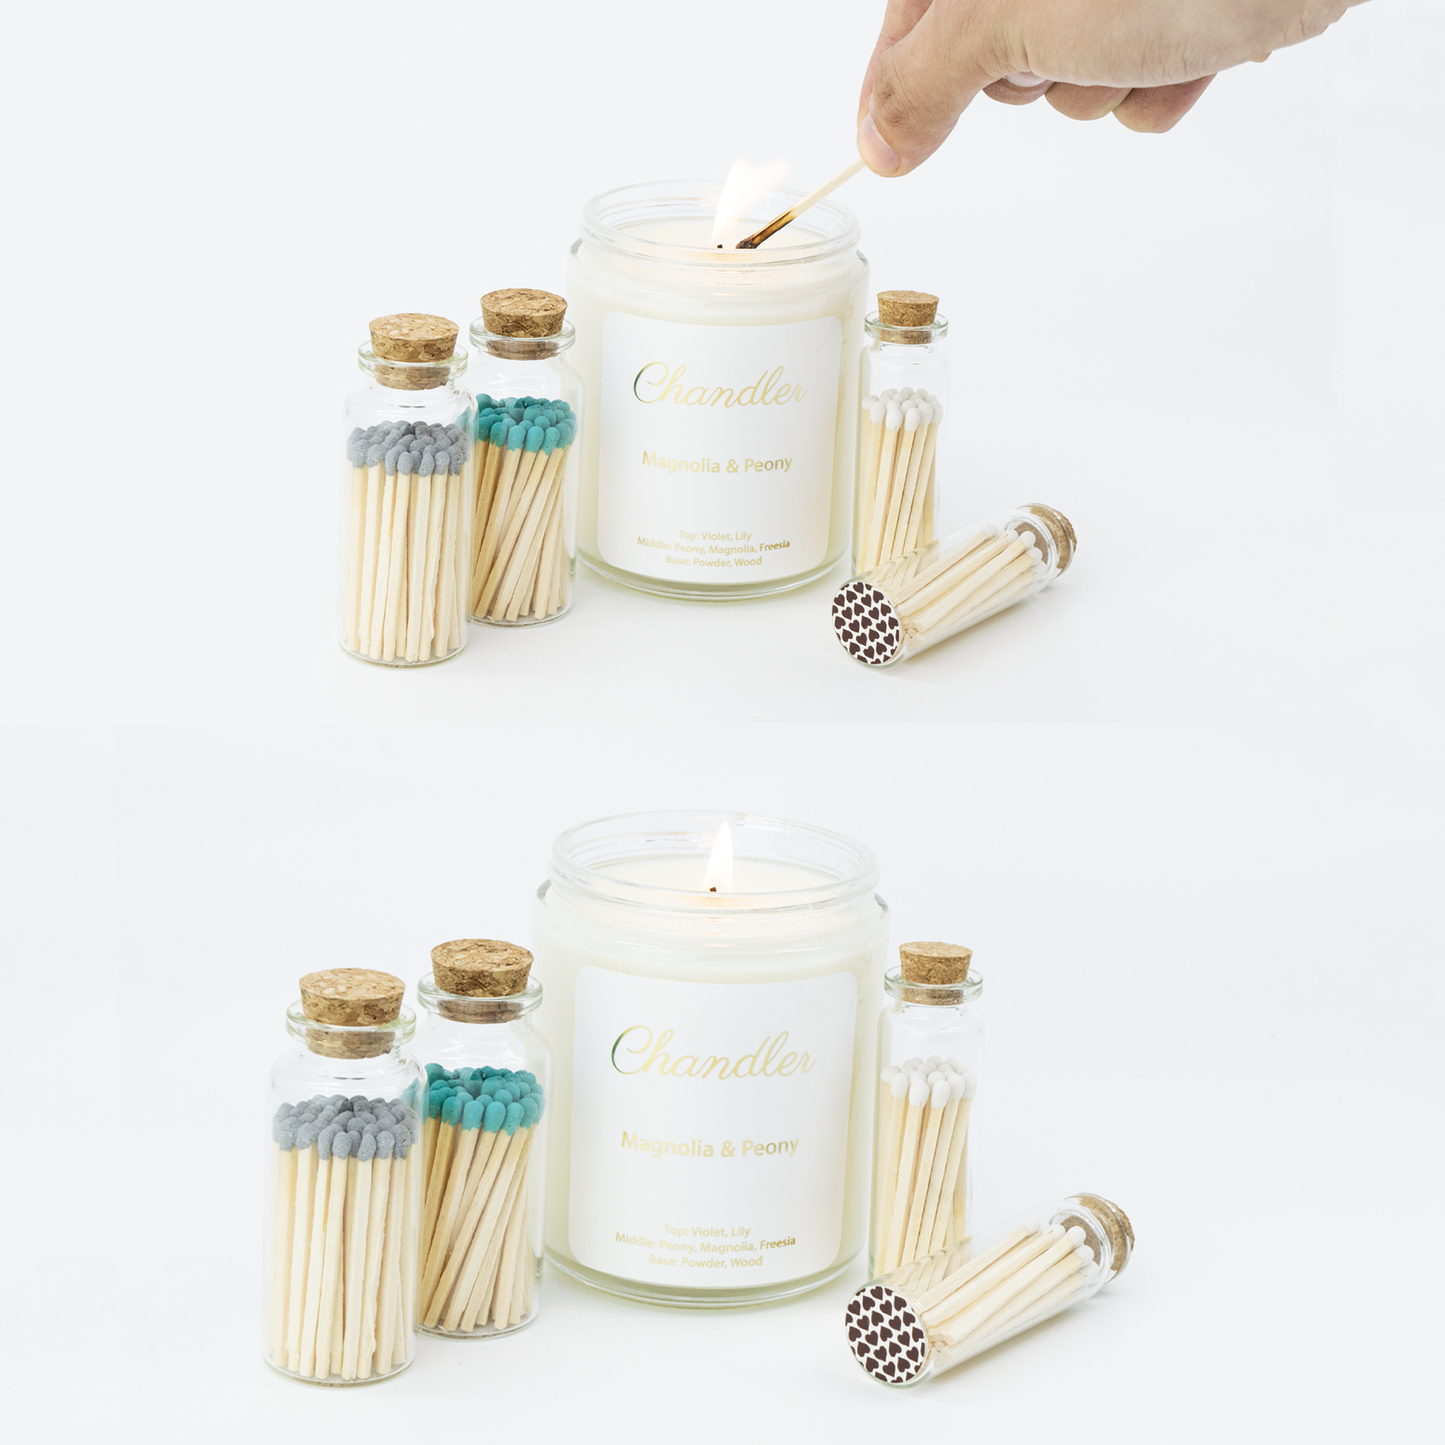 Small Match Bottles - Safety Matches in Jars with Striker: Mixed Colors / 40 Matchsticks Jar